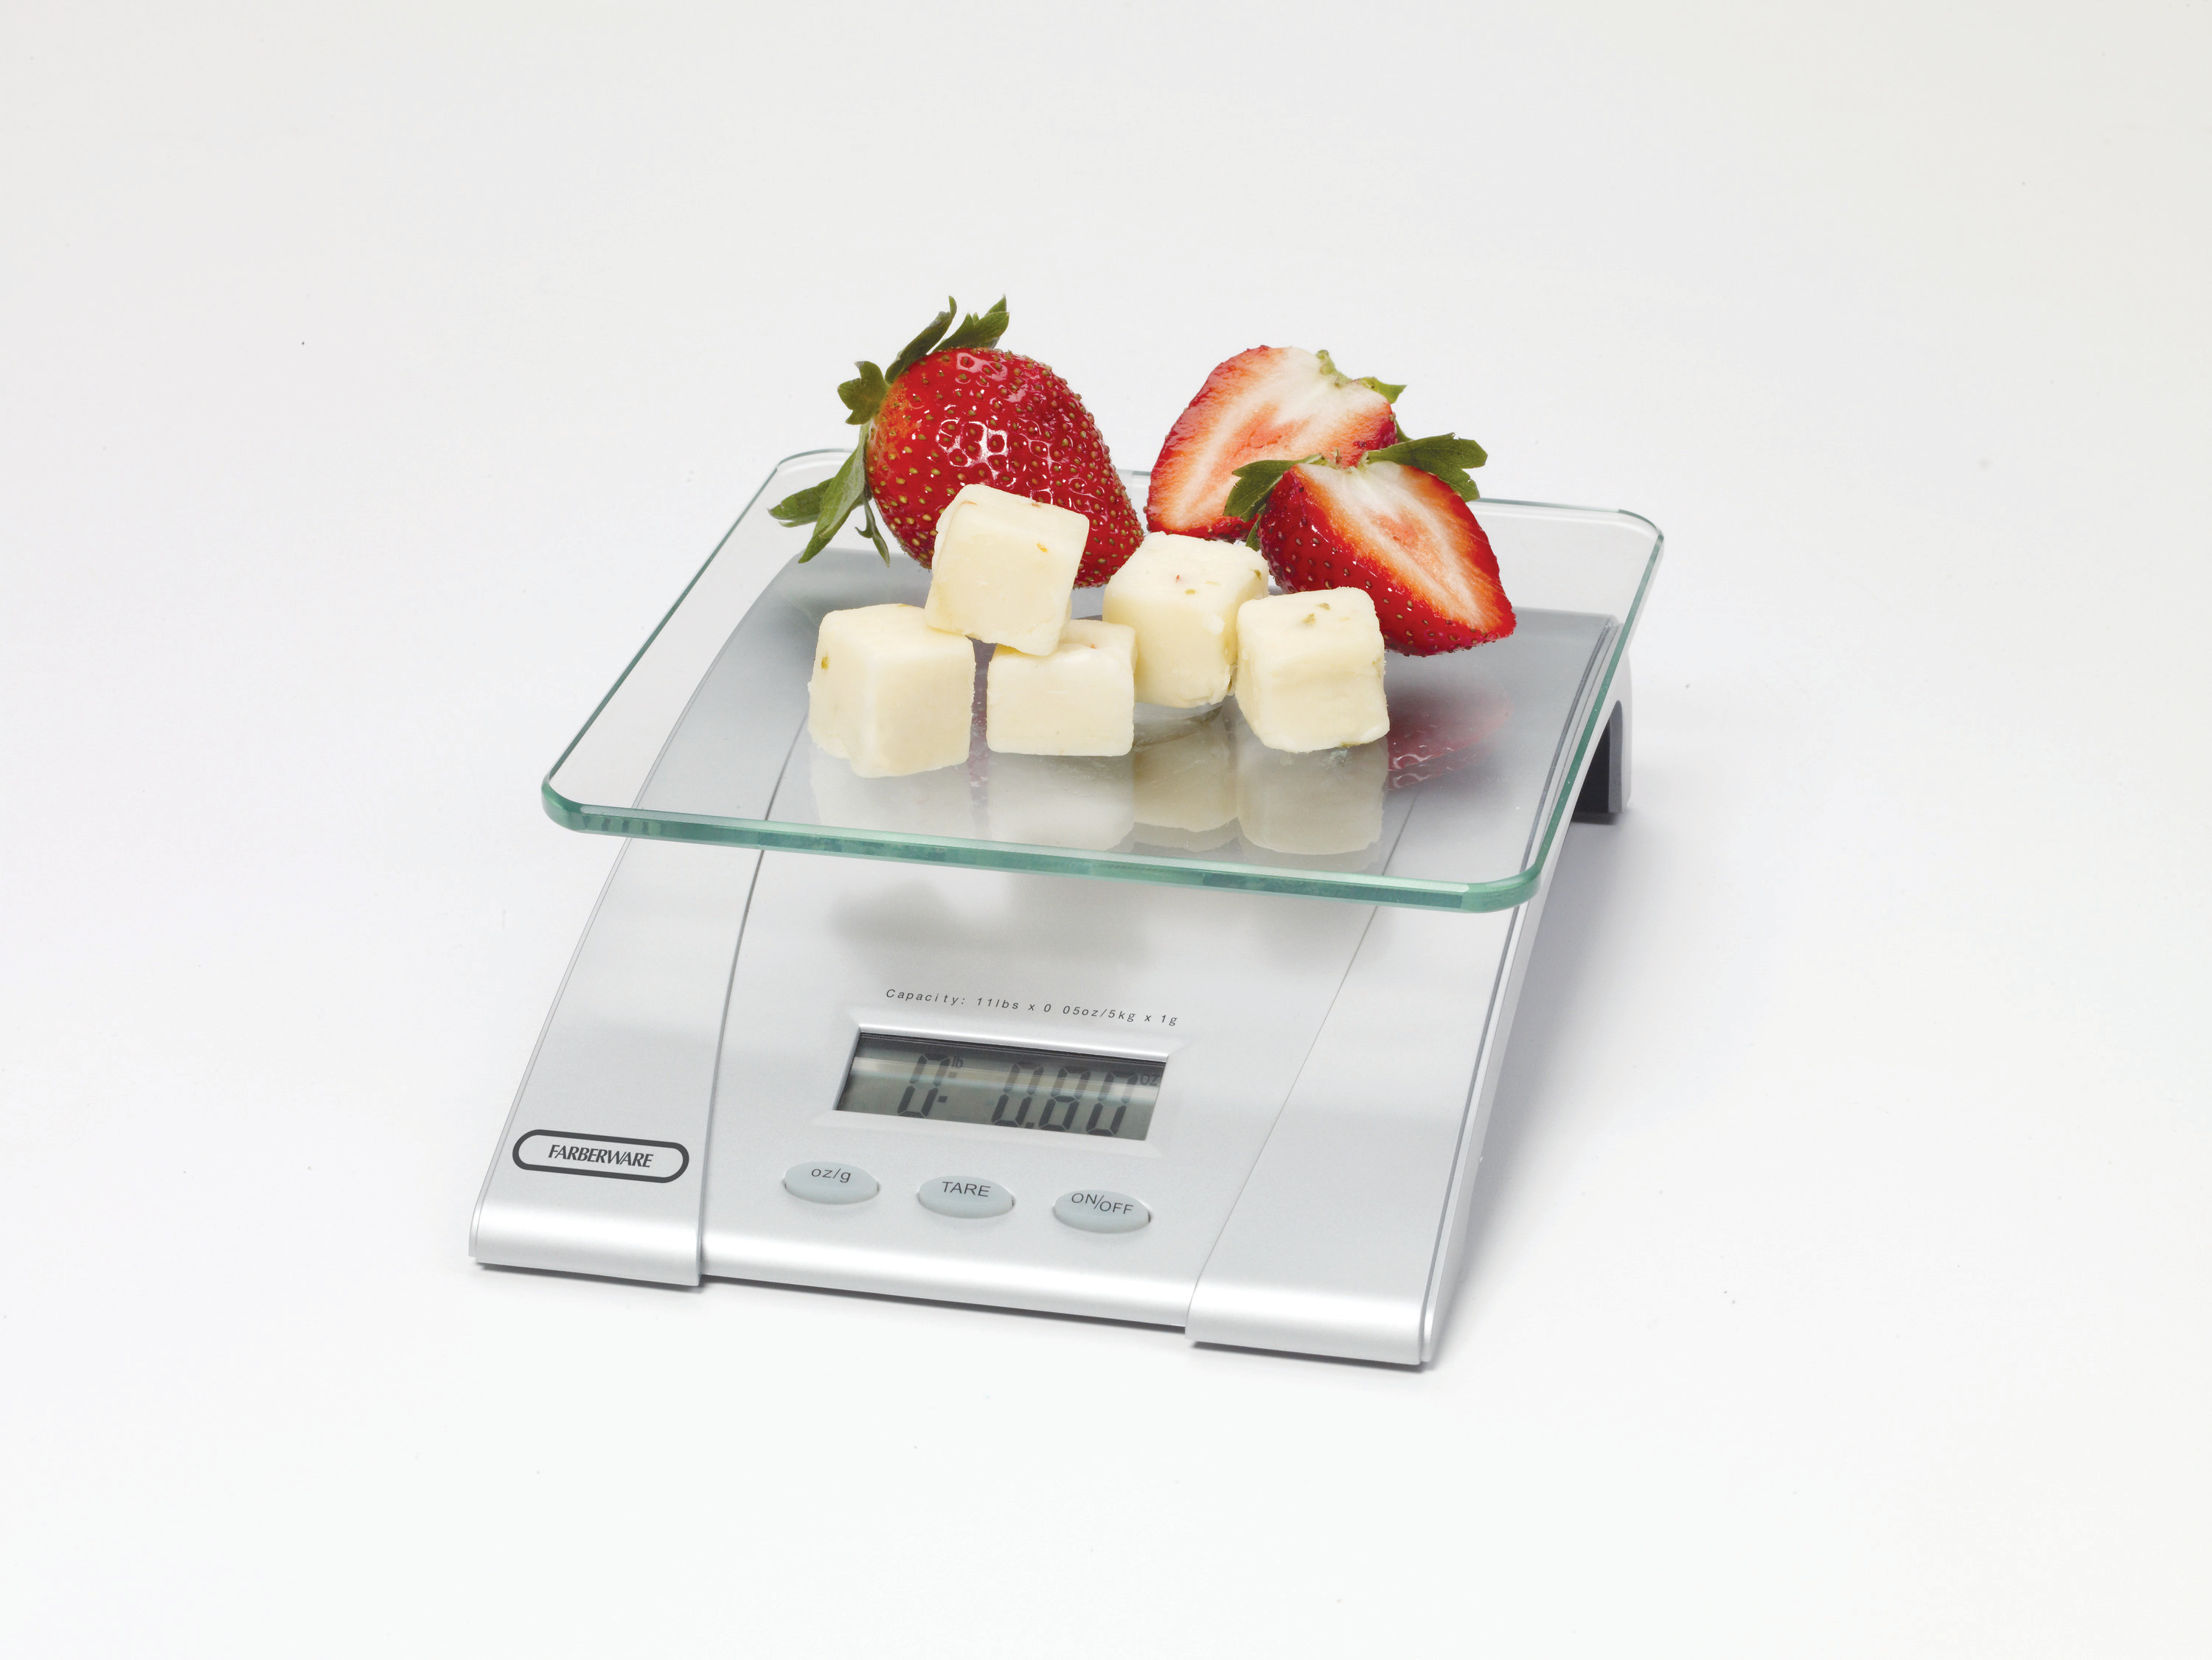 Farberware Professional Electronic Glass Top Kitchen Scale - image 1 of 9